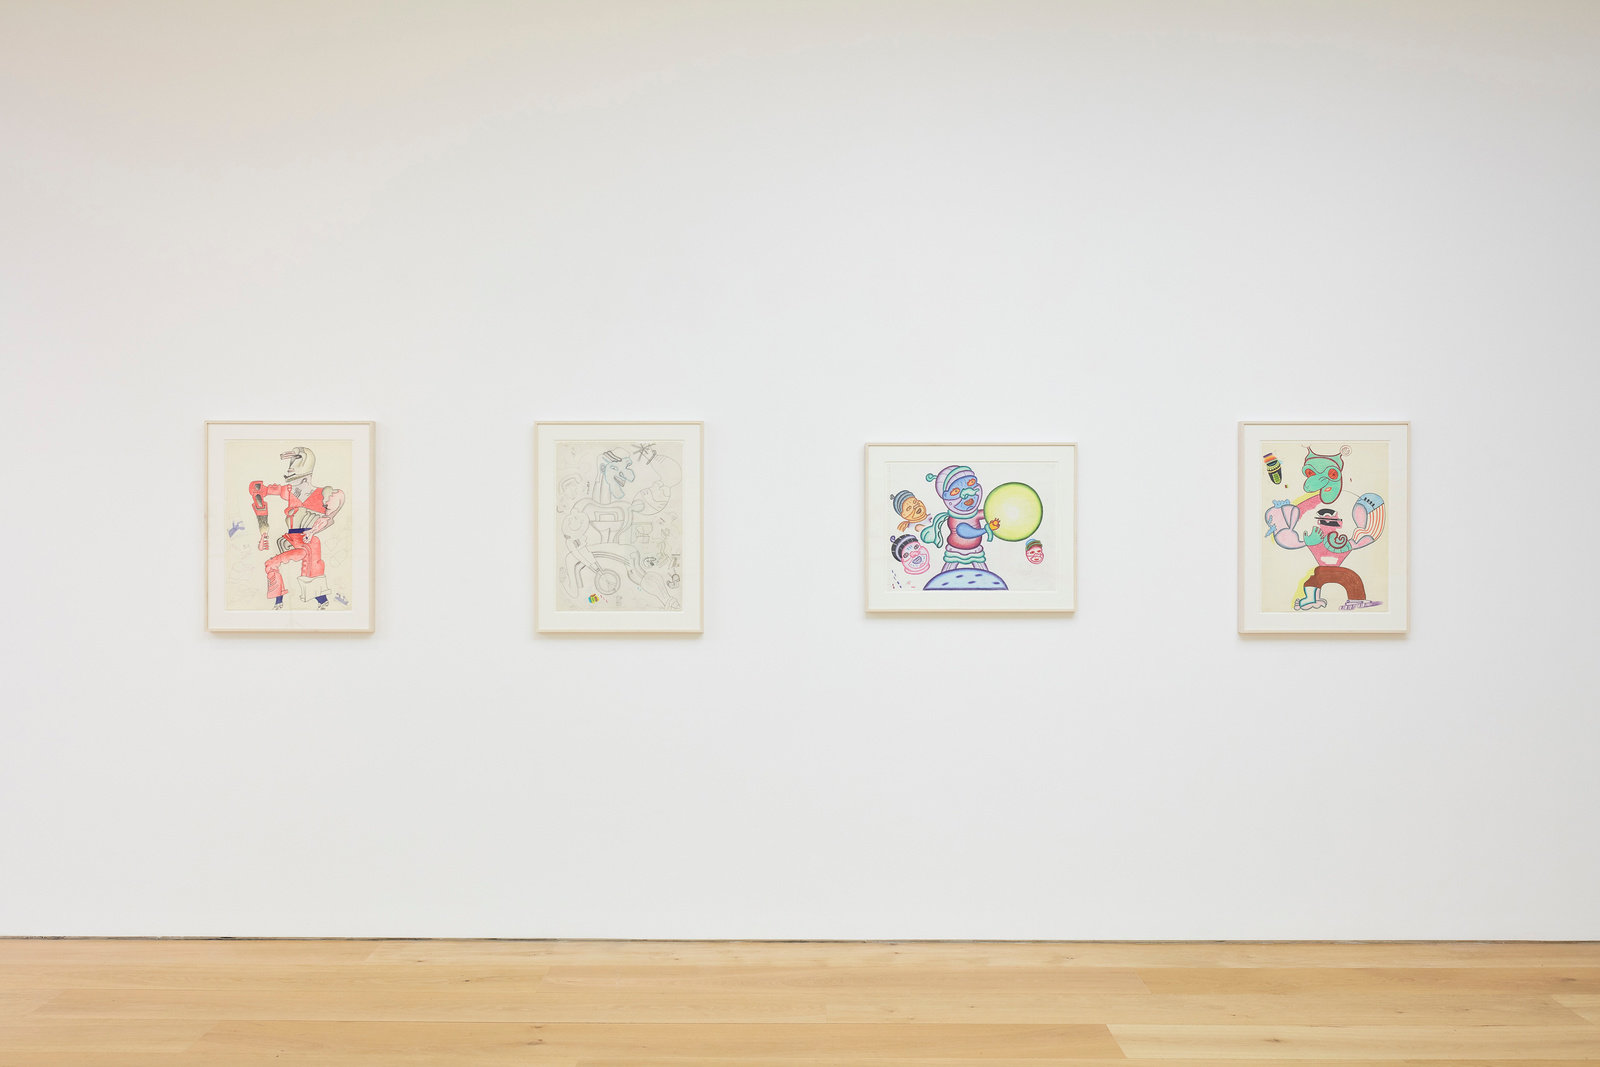 An installation view of four Karl Wirsum framed works on paper hanging on a wall horizontally.